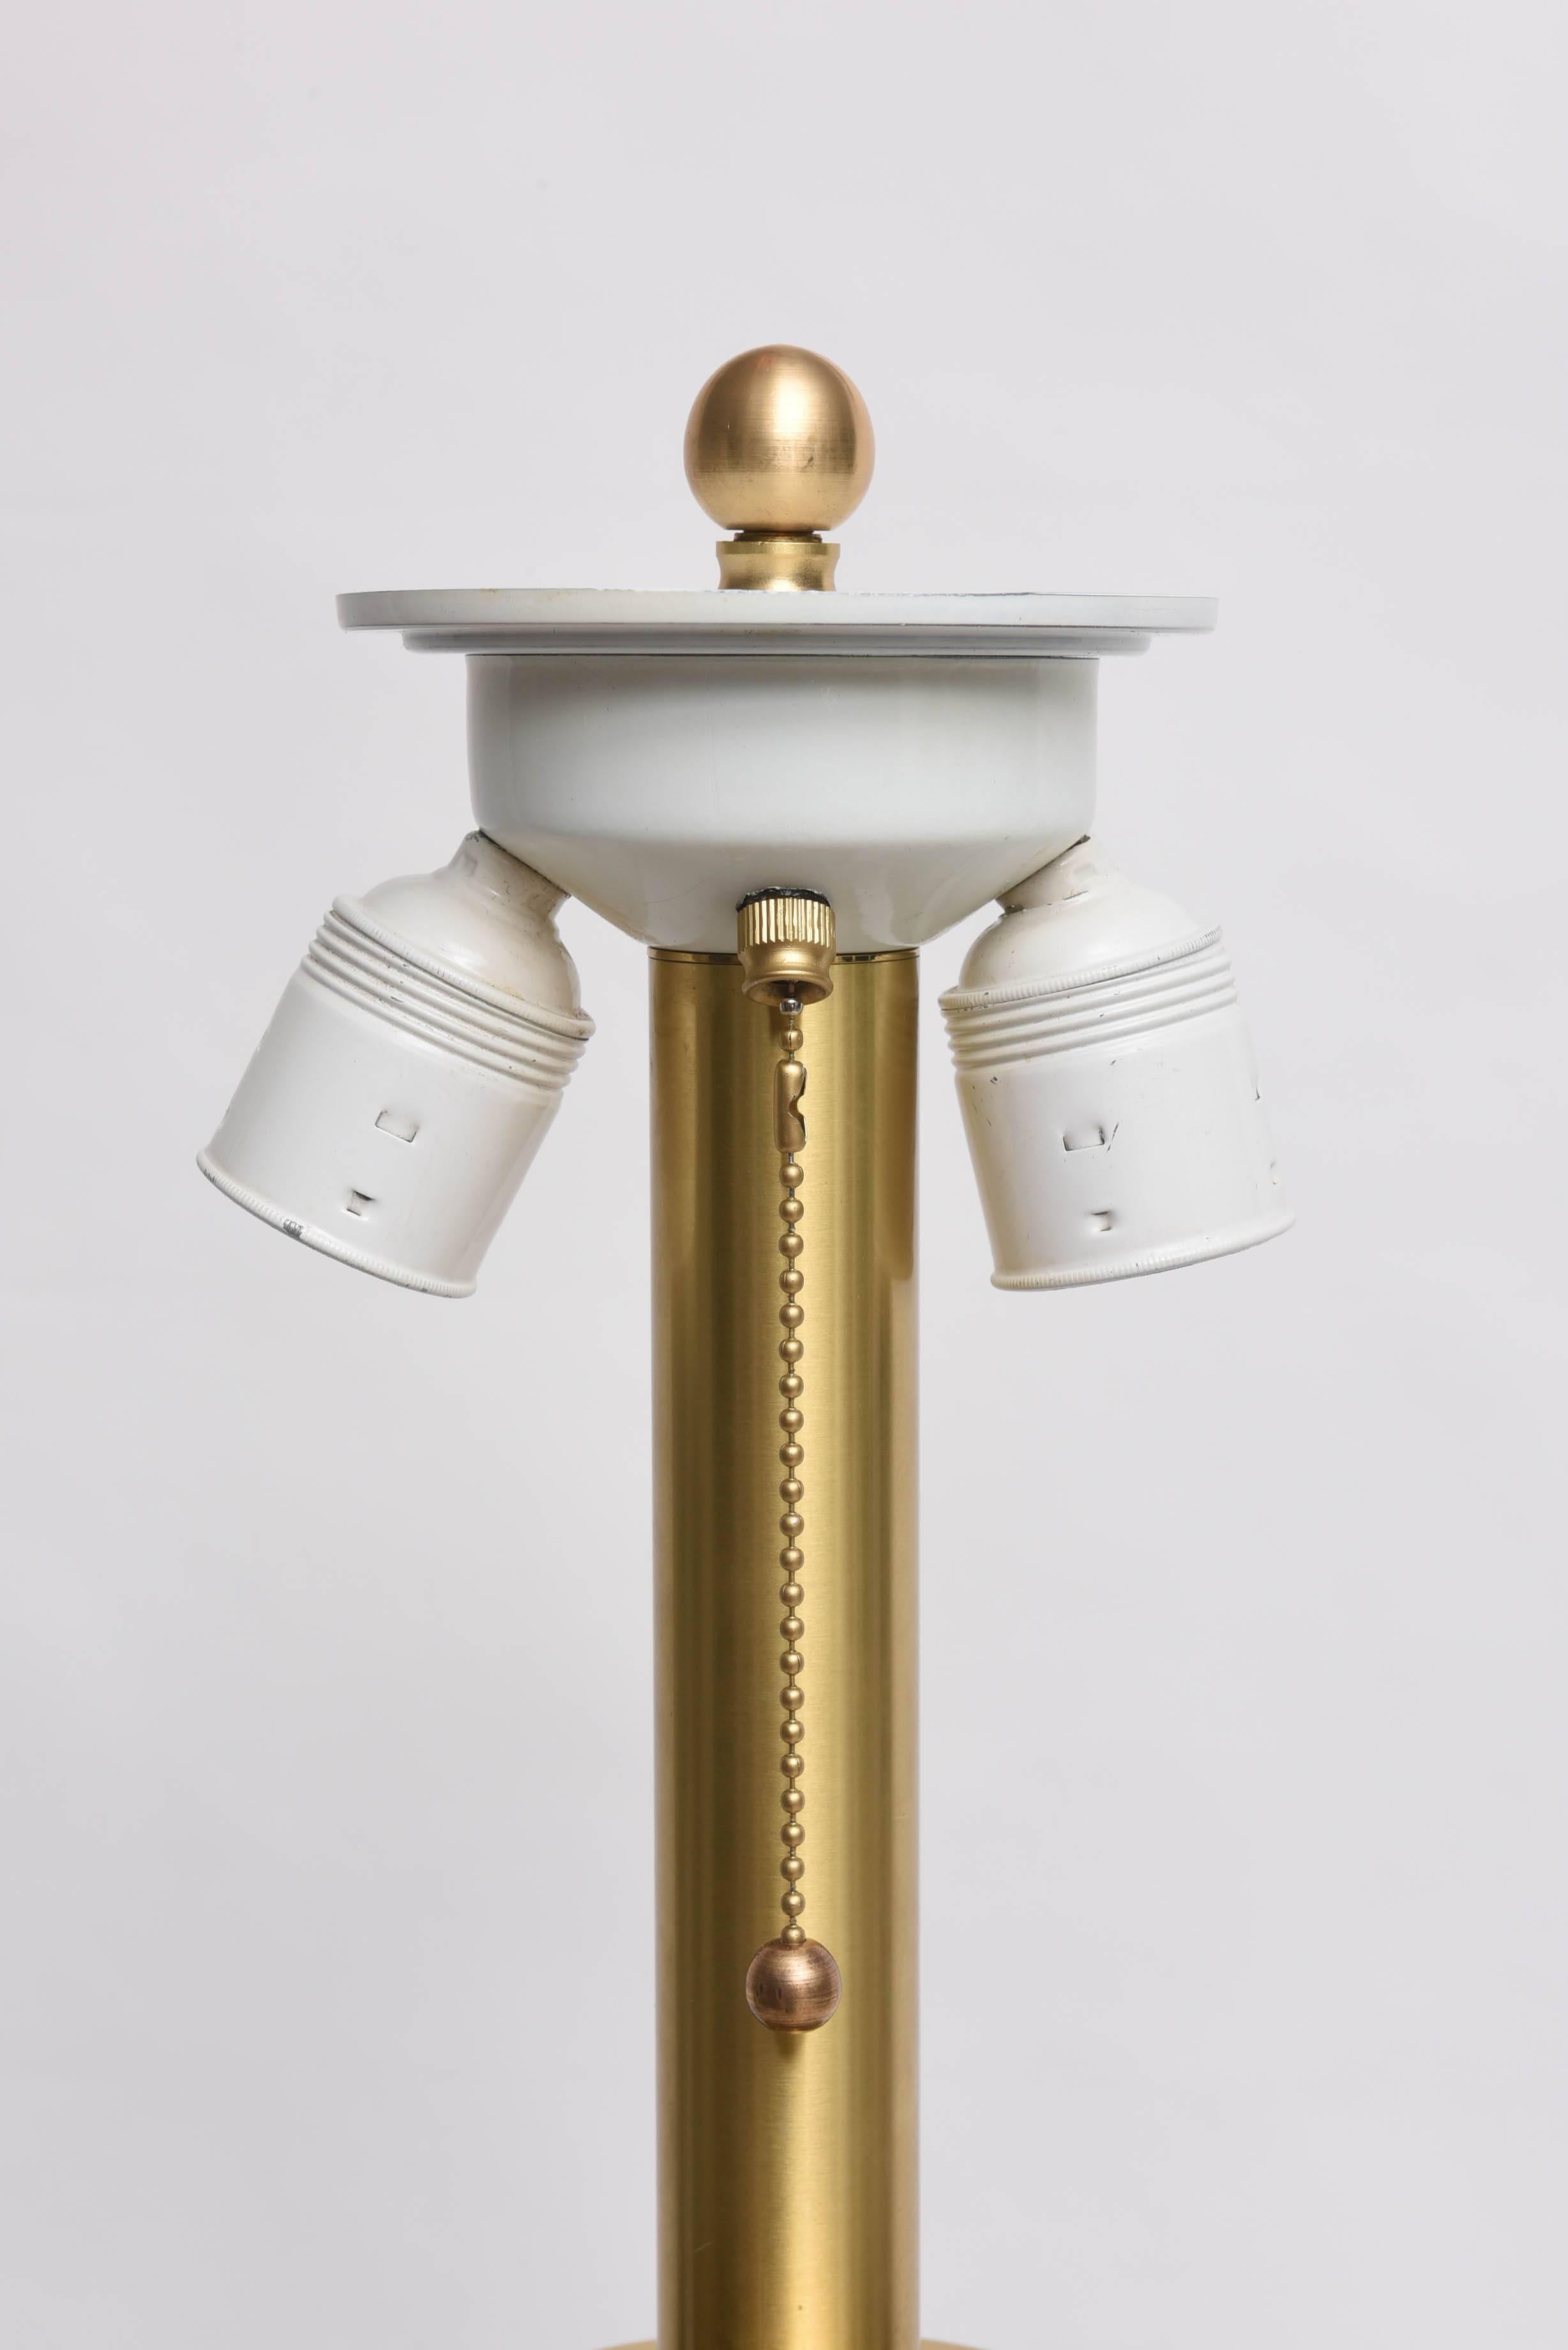 Italian Midcentury Table Lamp, Brass and Glass, Attributed to Studio Willy Rizzo